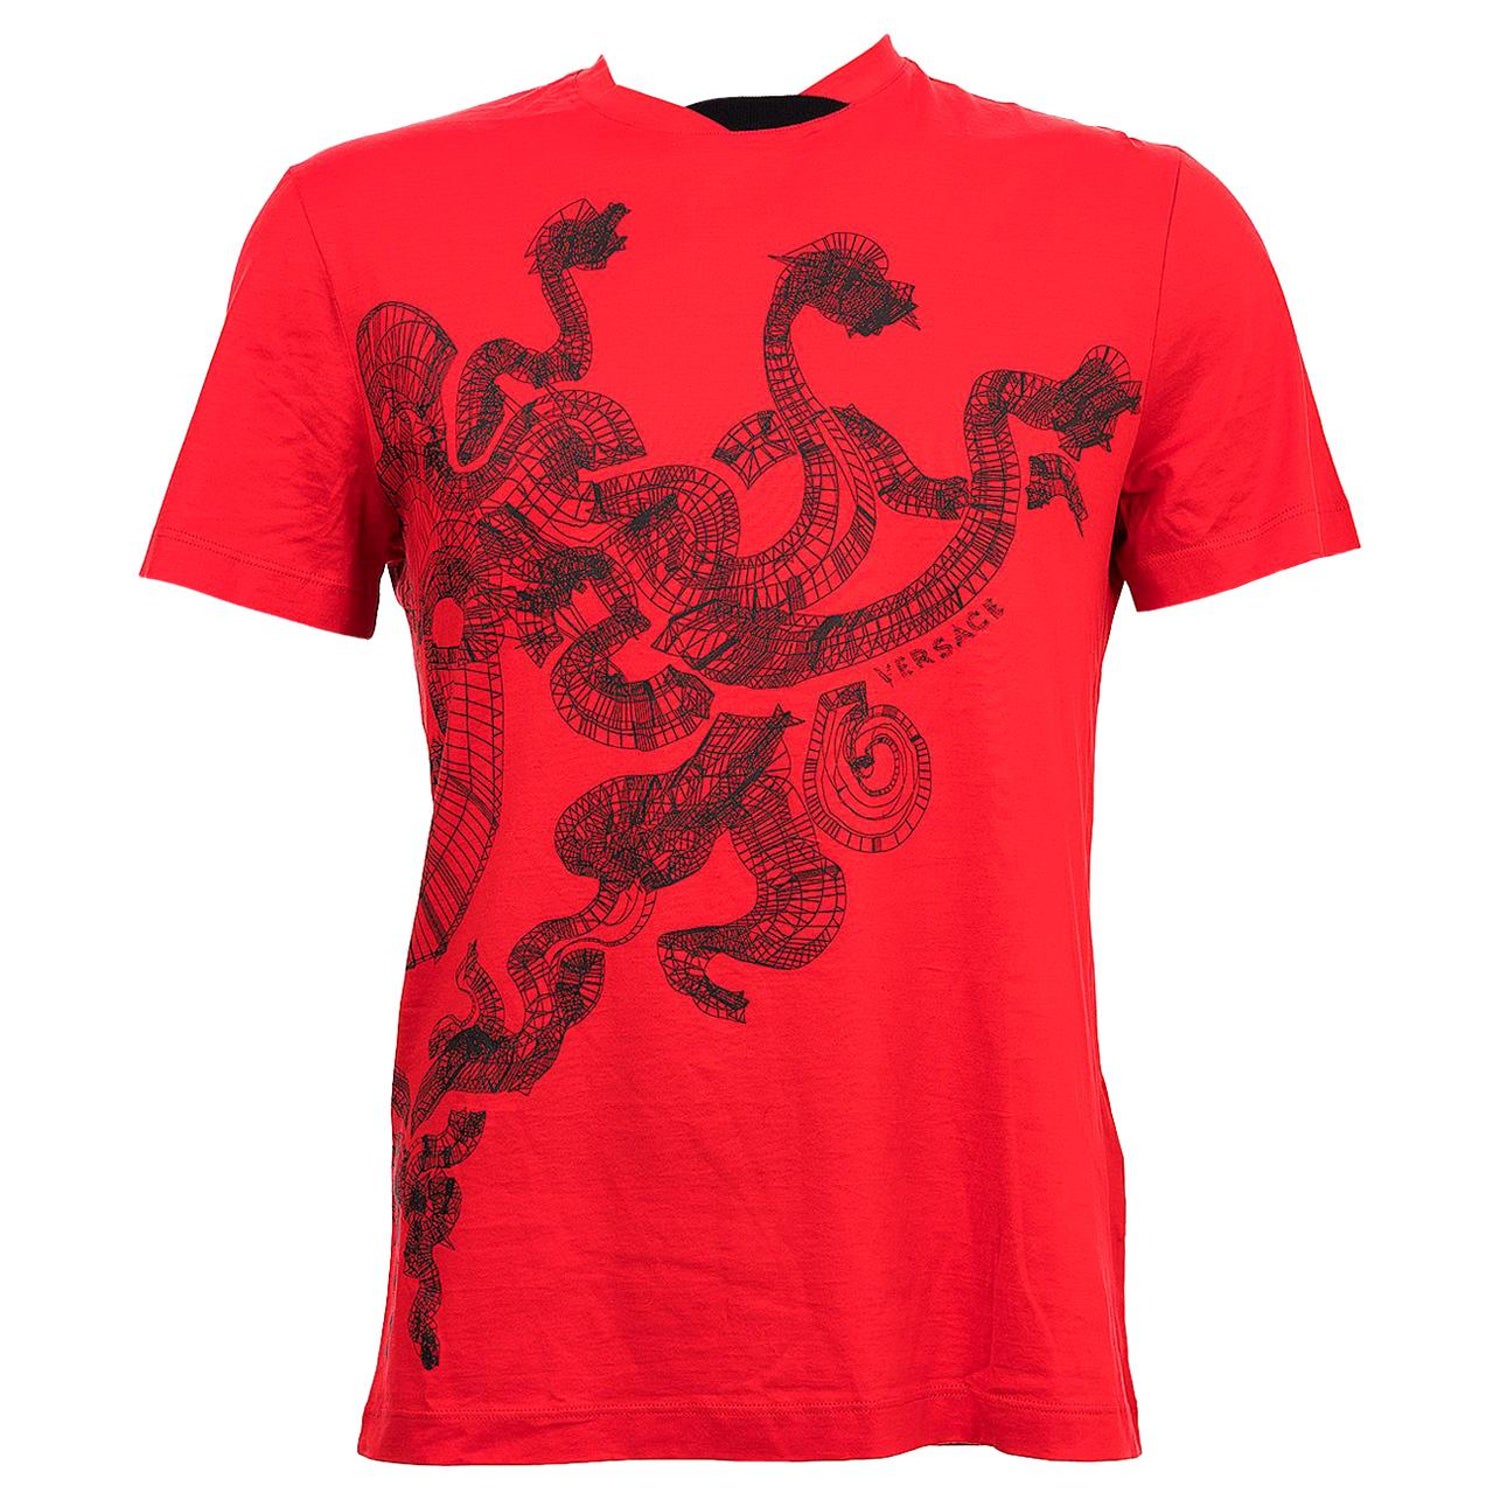 New VERSACE Red T-Shirt with Three-Headed Dragon for Men at 1stDibs | new  versace shirts, versace dragon shirt, versace red top